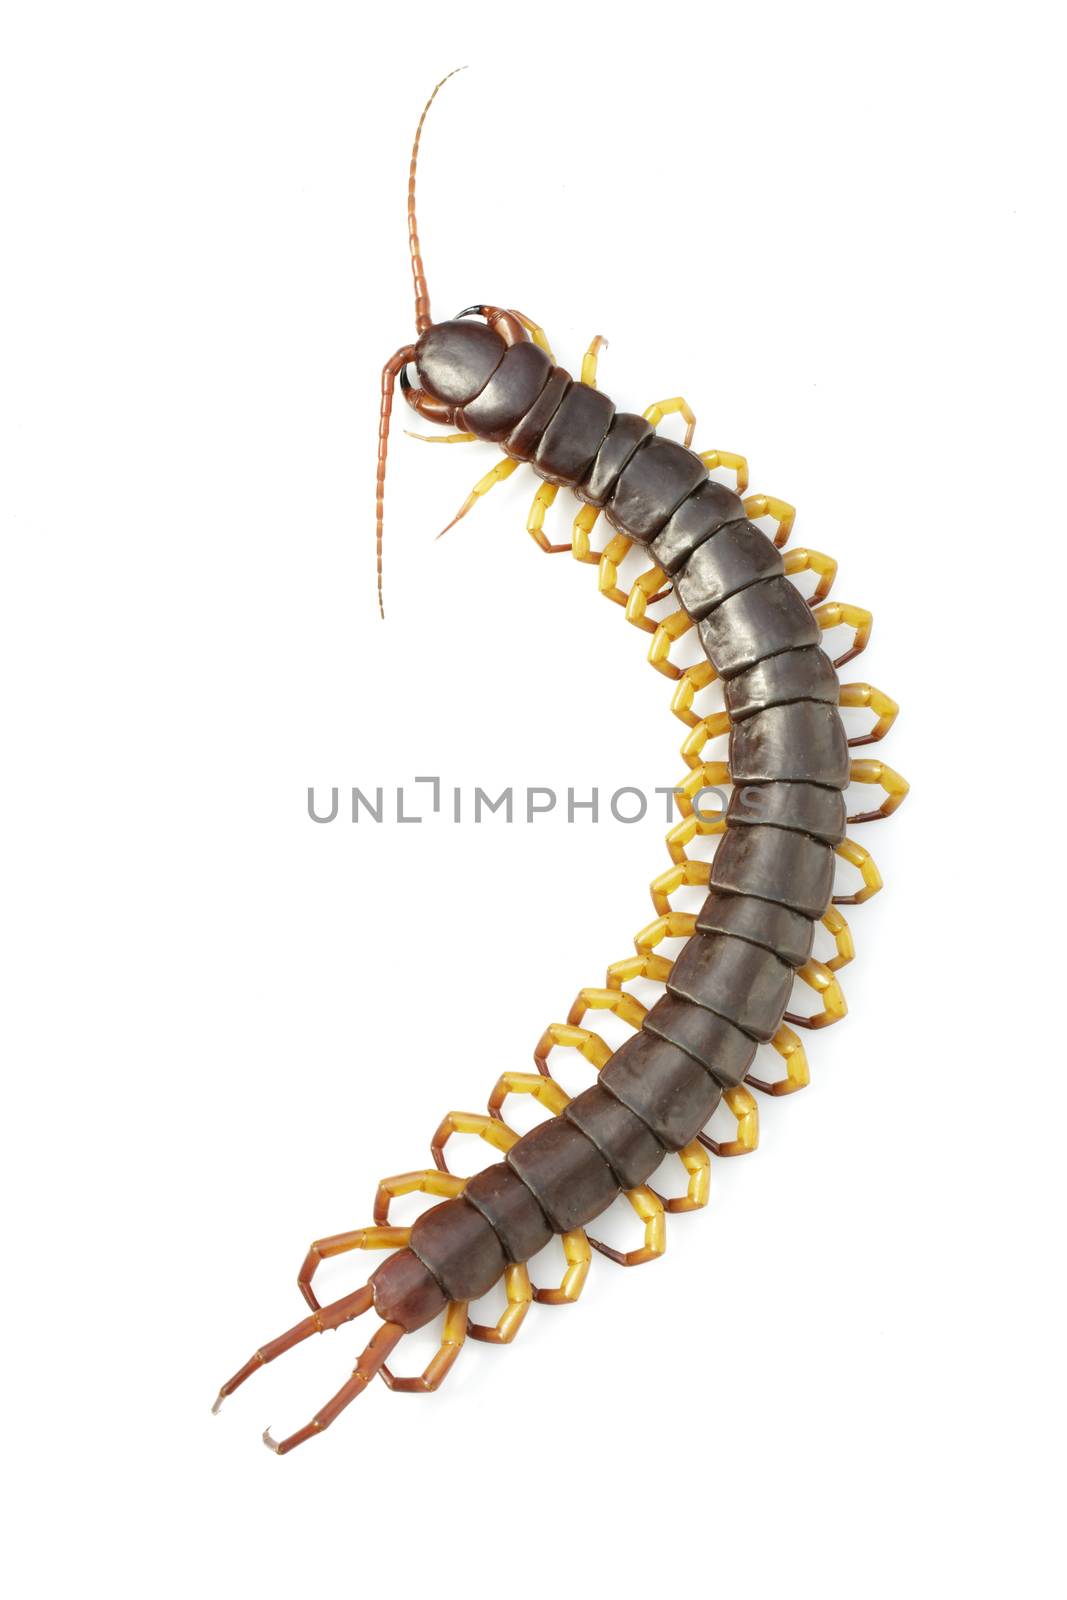 Image of centipedes or chilopoda isolated on white background. A by yod67